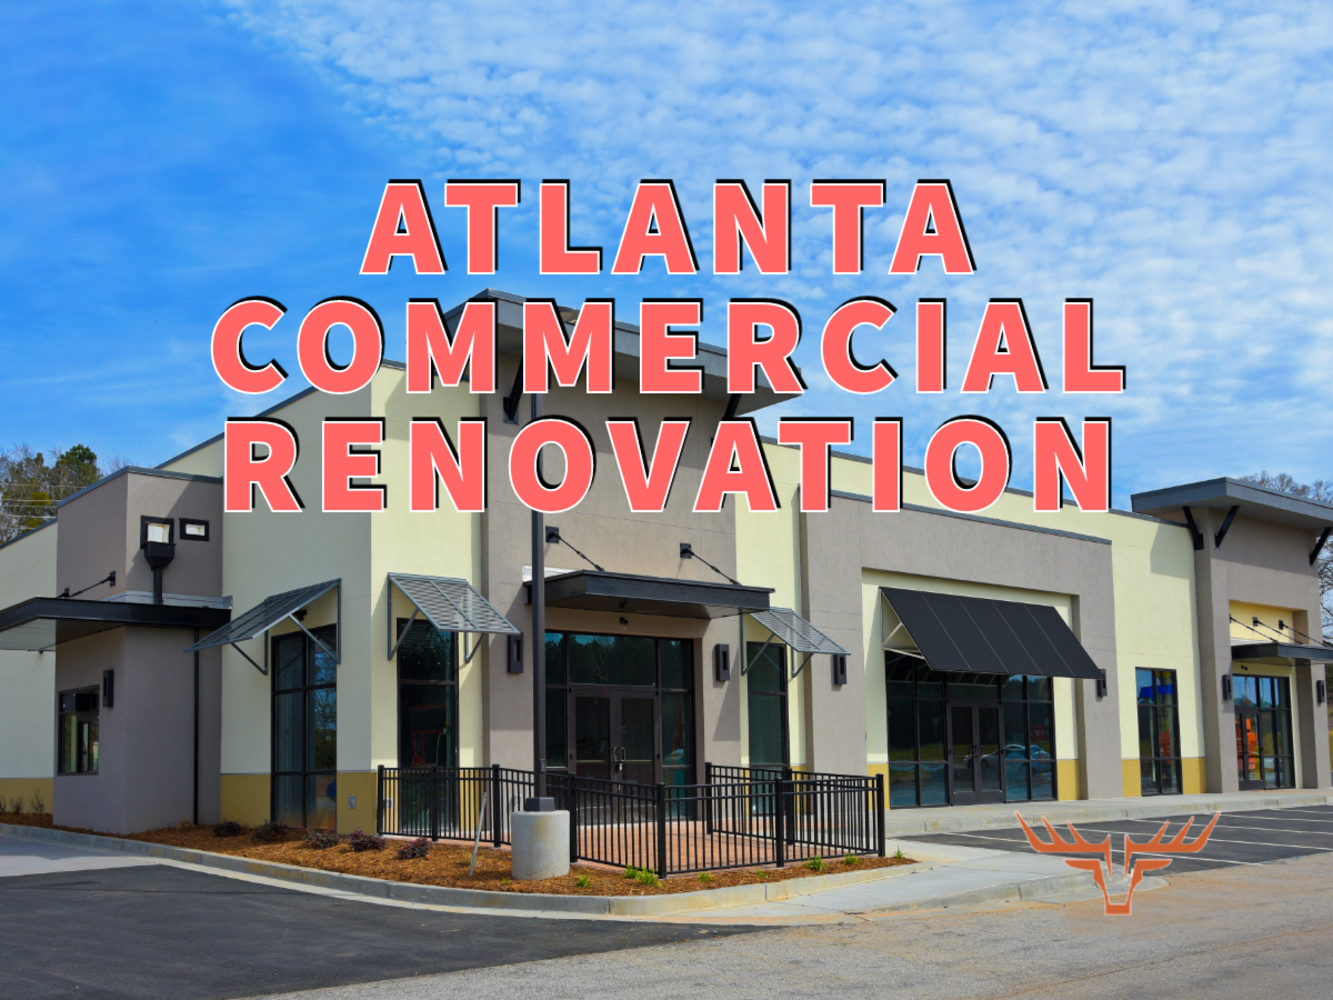 Atlanta commercial renovation written in red over newly updated commercial building